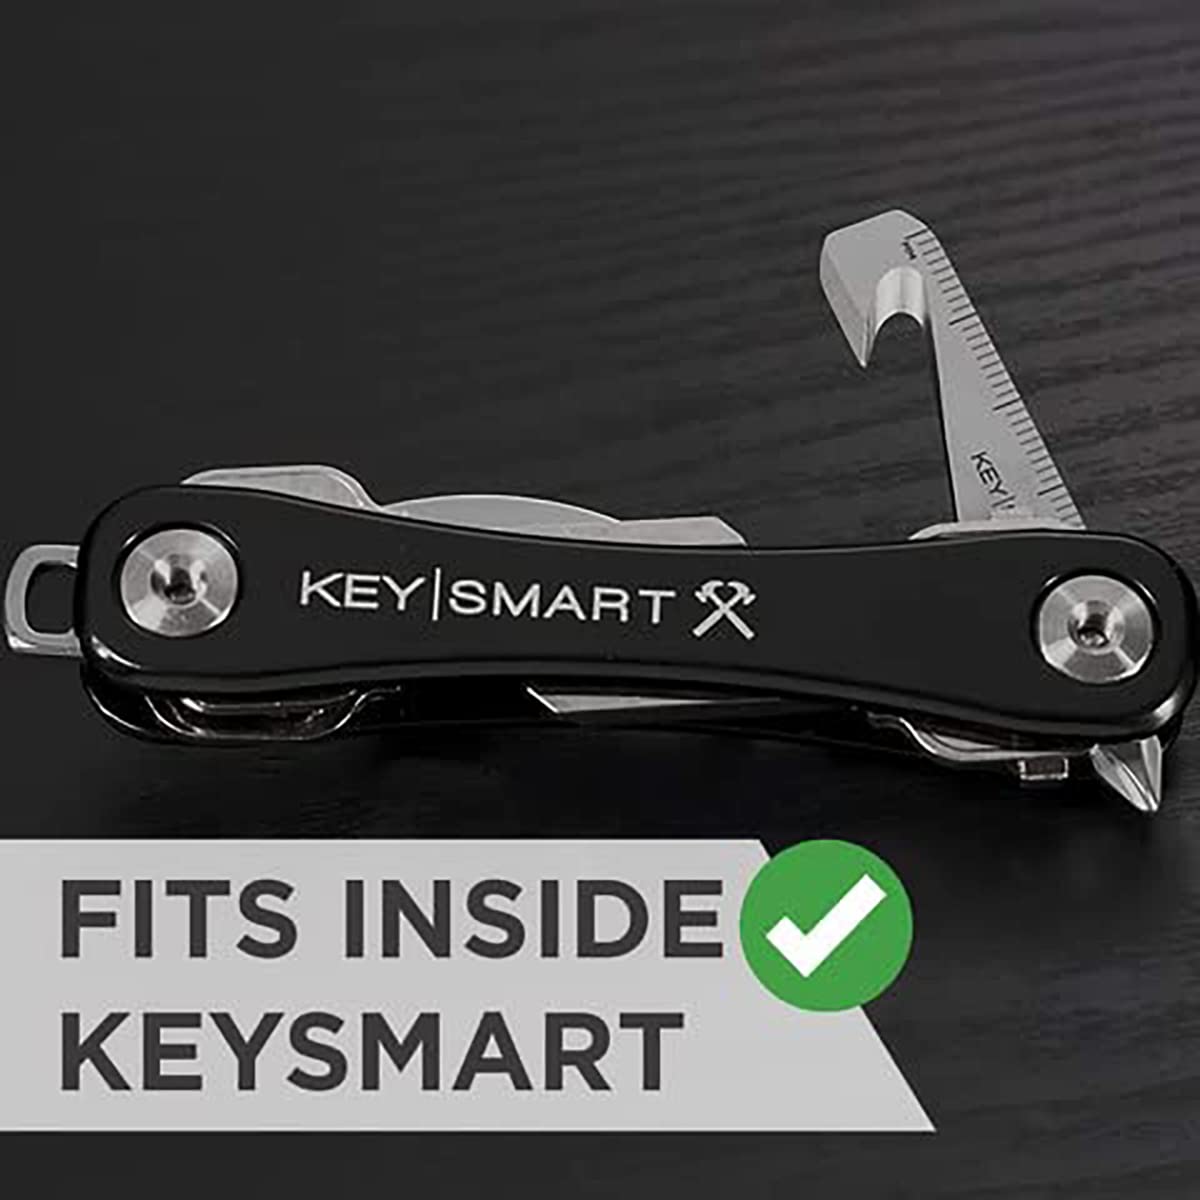 KeySmart MultiTool - 5-in-1 Multi-Purpose Keychain Tool with Box Opener, Ruler, Pry Bar, Phillips and Flat Head Screwdriver - EDC Gear Mini Multitool, and Keychain Accessories - Great Stocking Stuffer